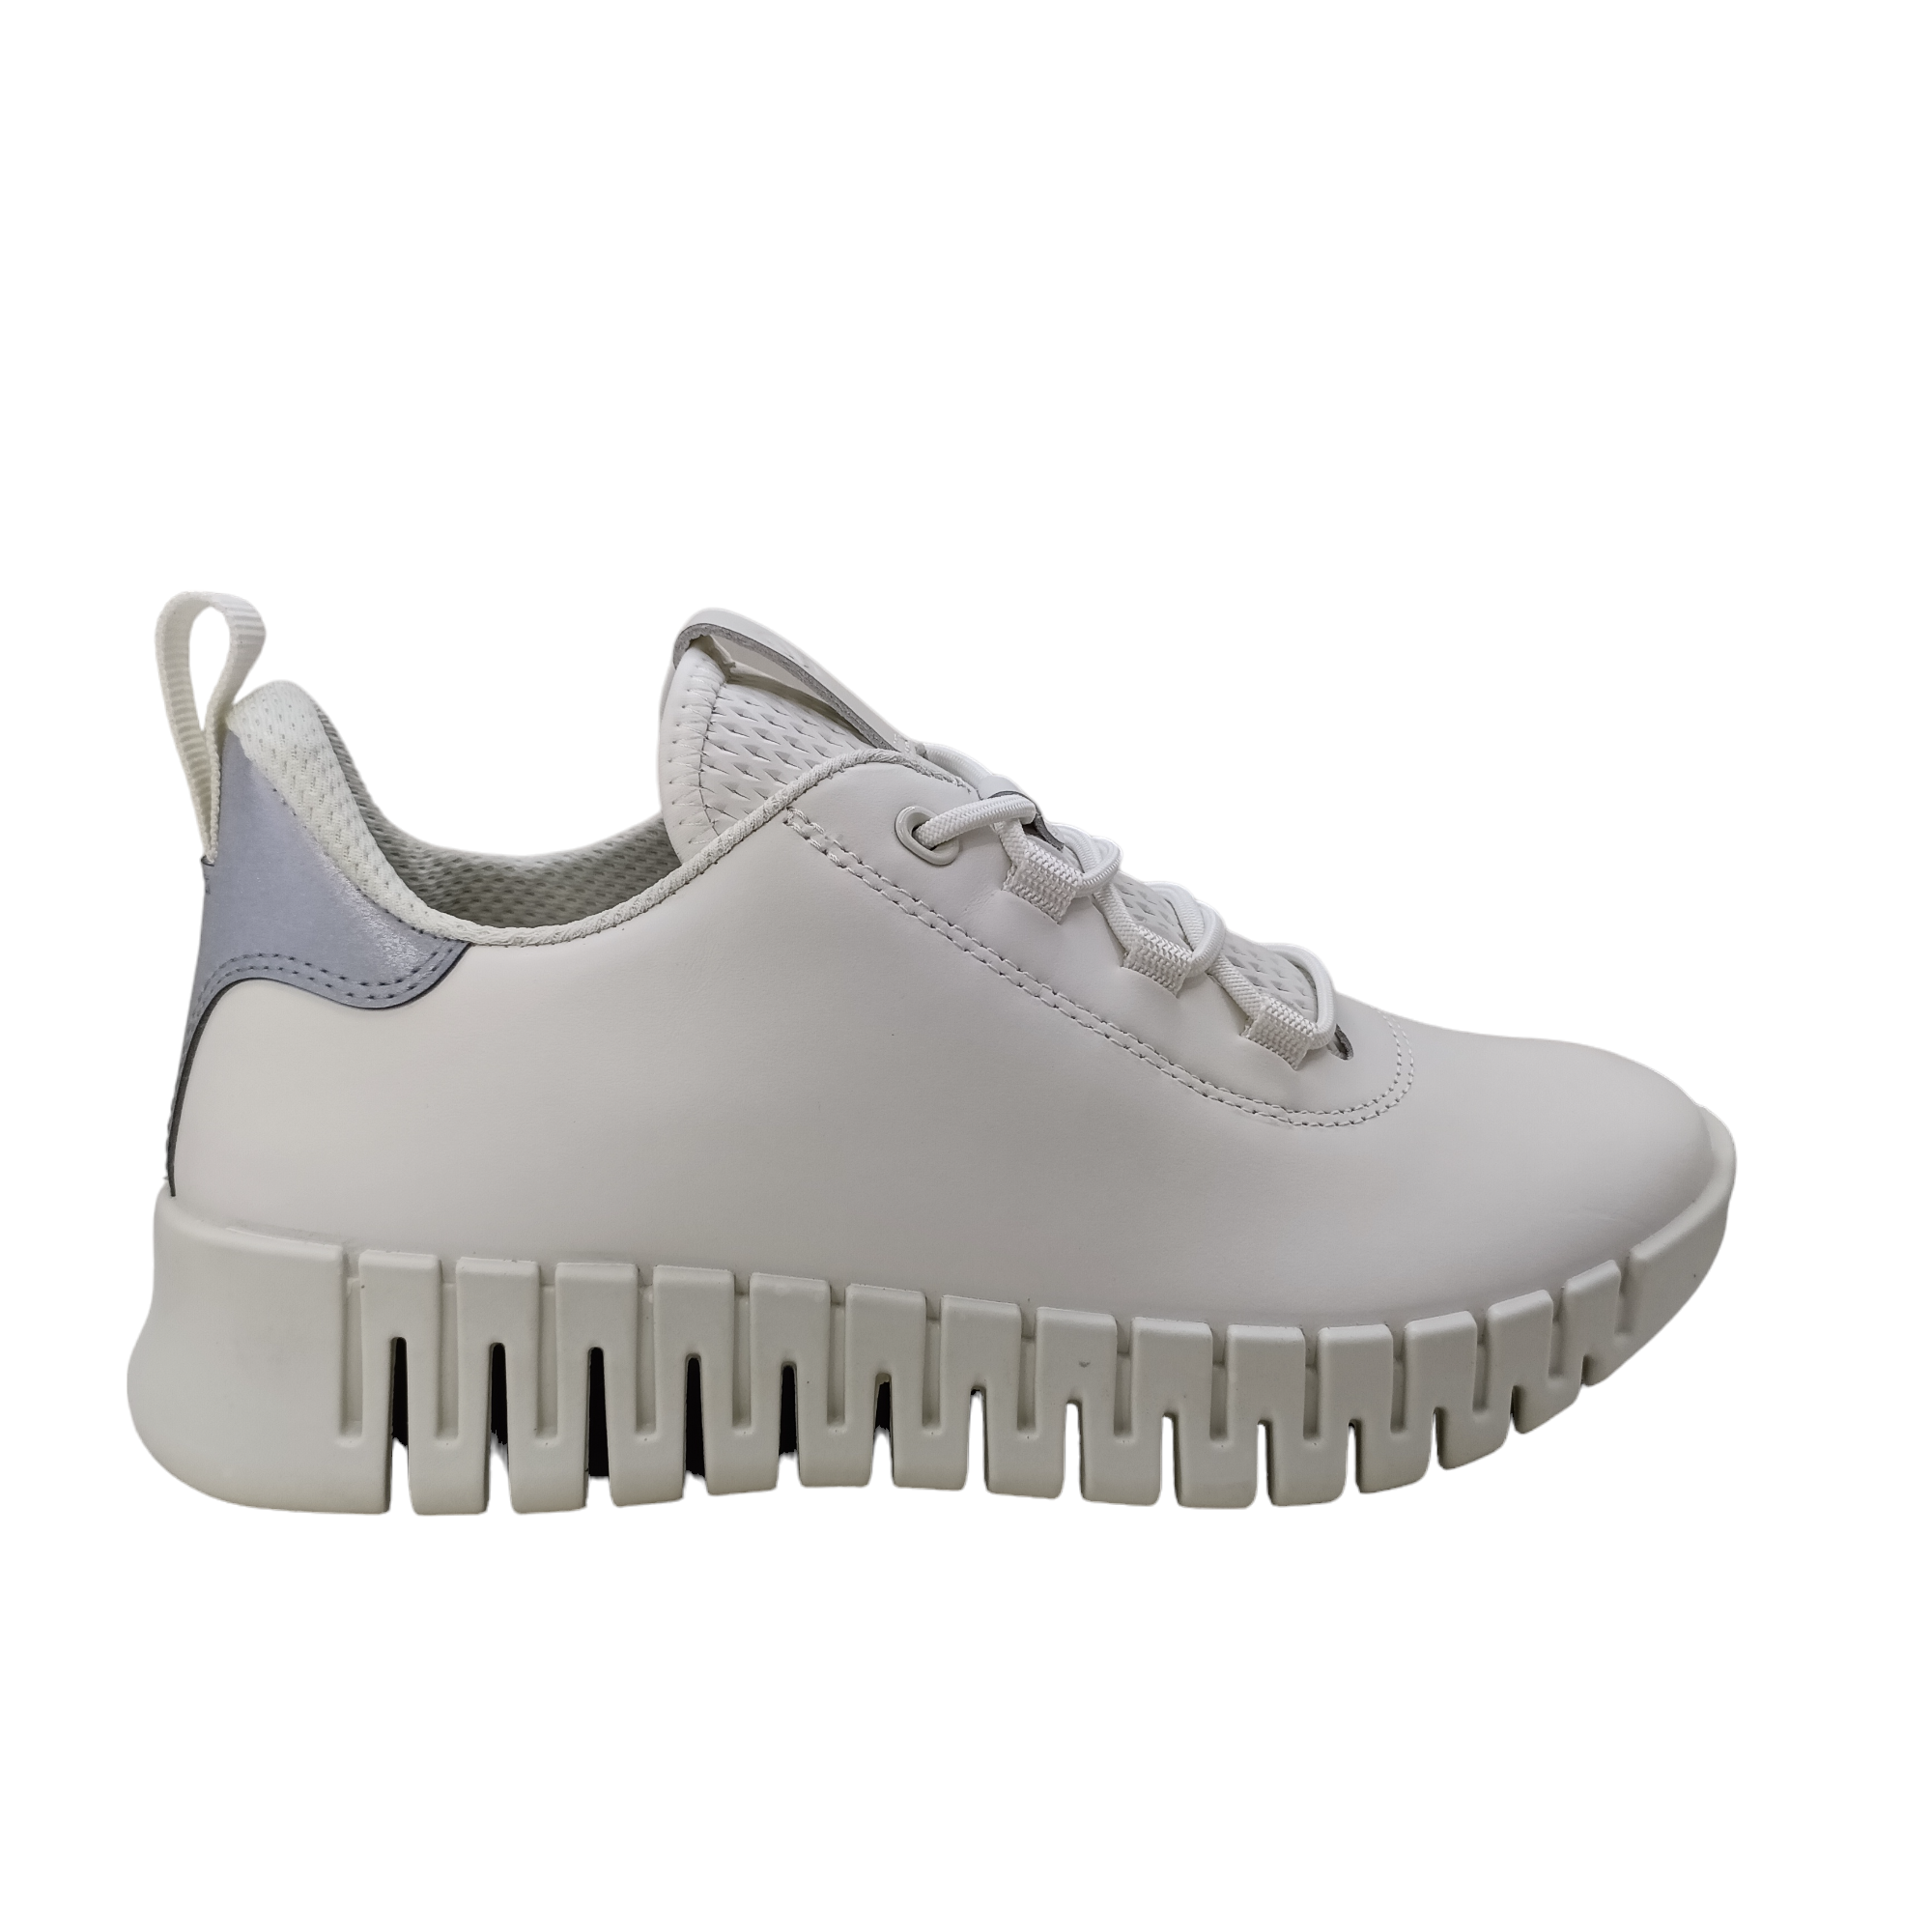 Shop Gruuv Sneaker W - with shoe&me - from Ecco - Sneakers - Sneaker, Winter, Womens